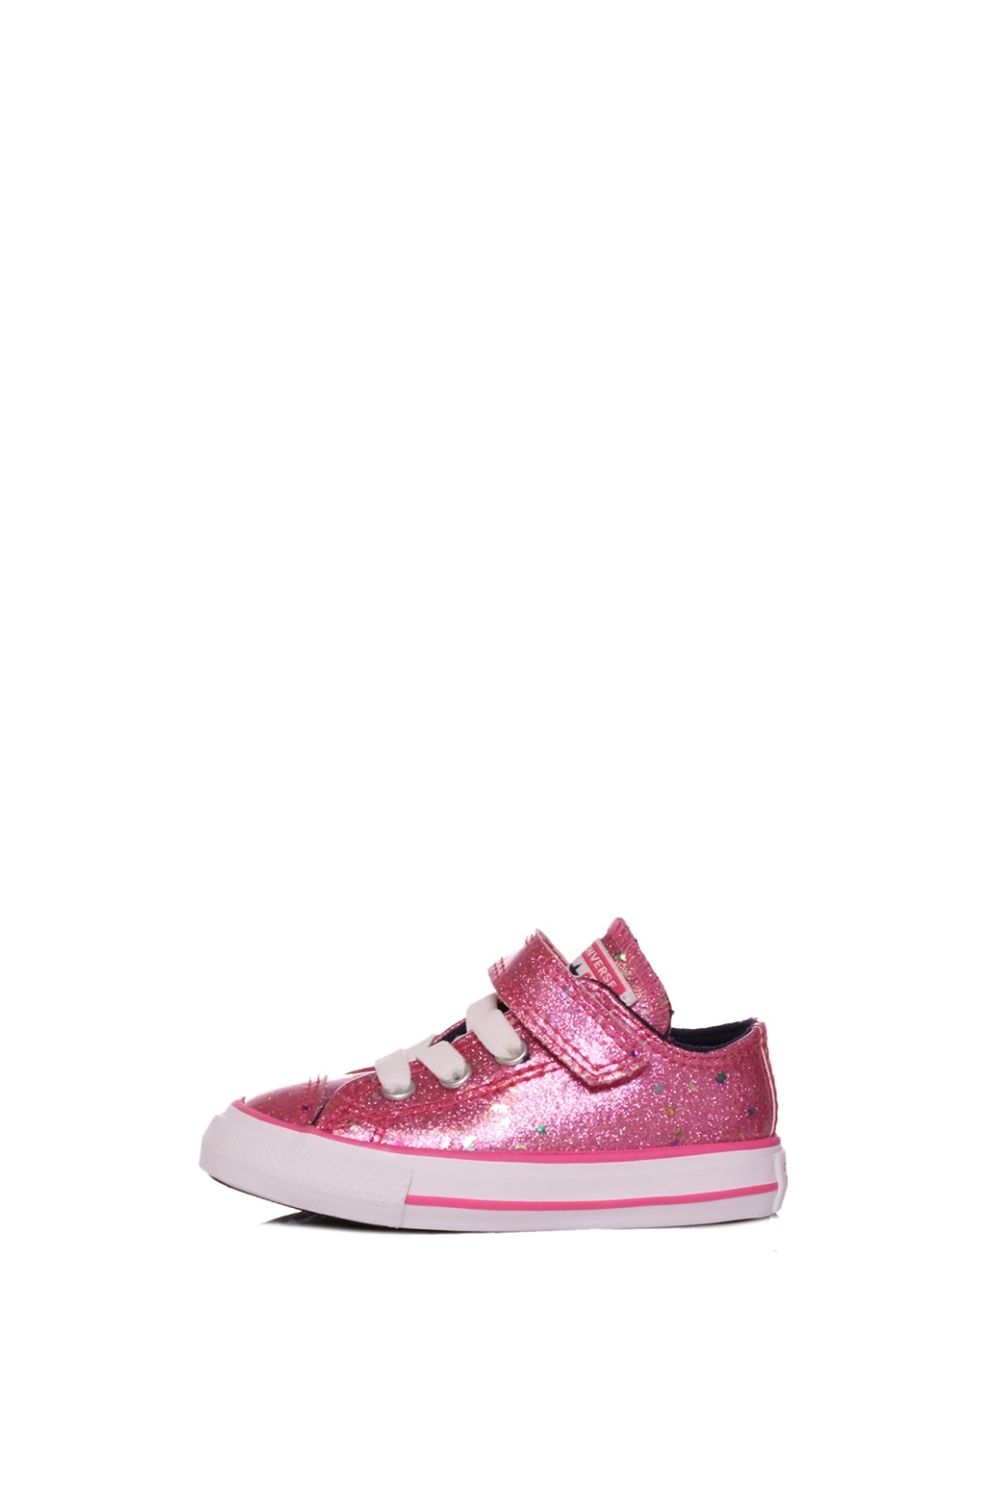 CONVERSE – Βρεφικα sneakers CONVERSE CHUCK TAYLOR ALL STAR 1V ροζ